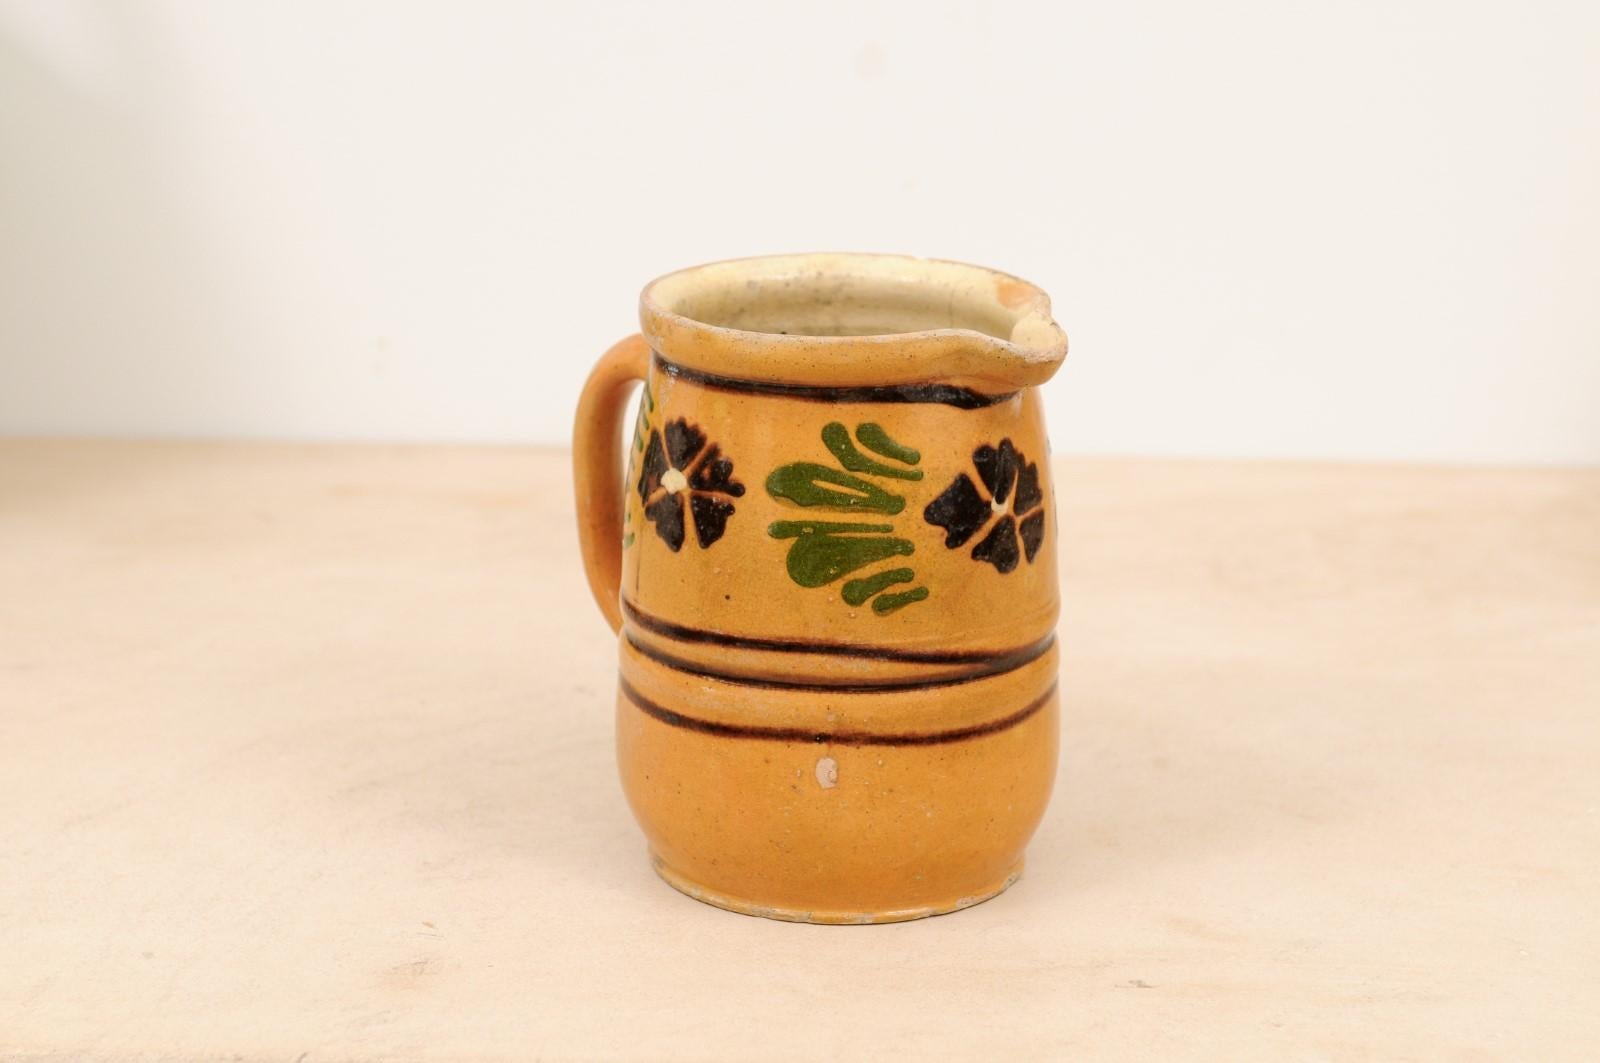 A French rustic pitcher from the 19th century, with yellow, brown and green glaze. Created in France during the 19th century, this charming pitcher features a yellow glazed ground adorned with brown pansies and their green leaves, separated from the